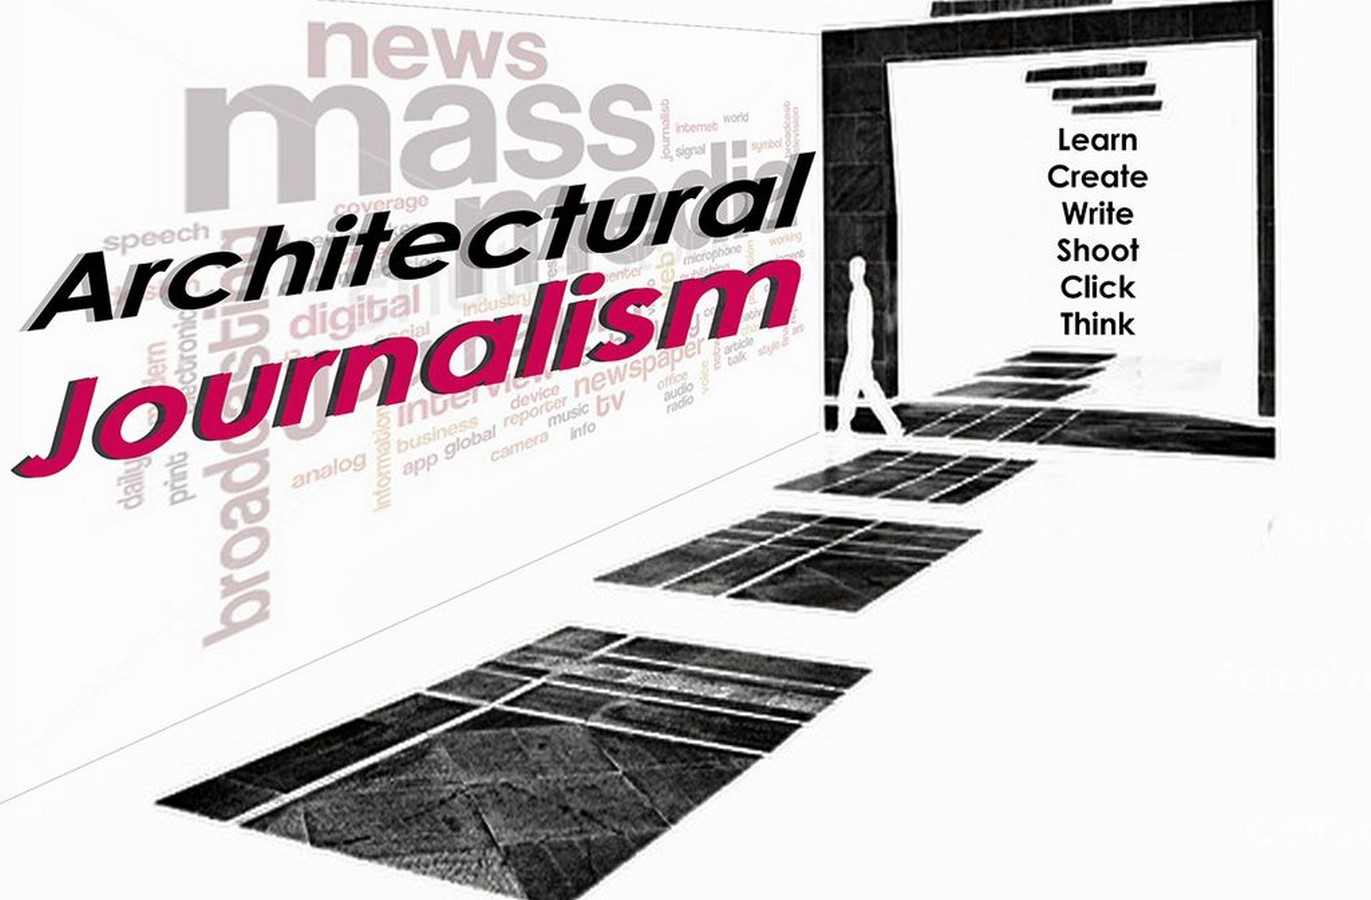 The growing interest in Architecture journalism - Sheet1